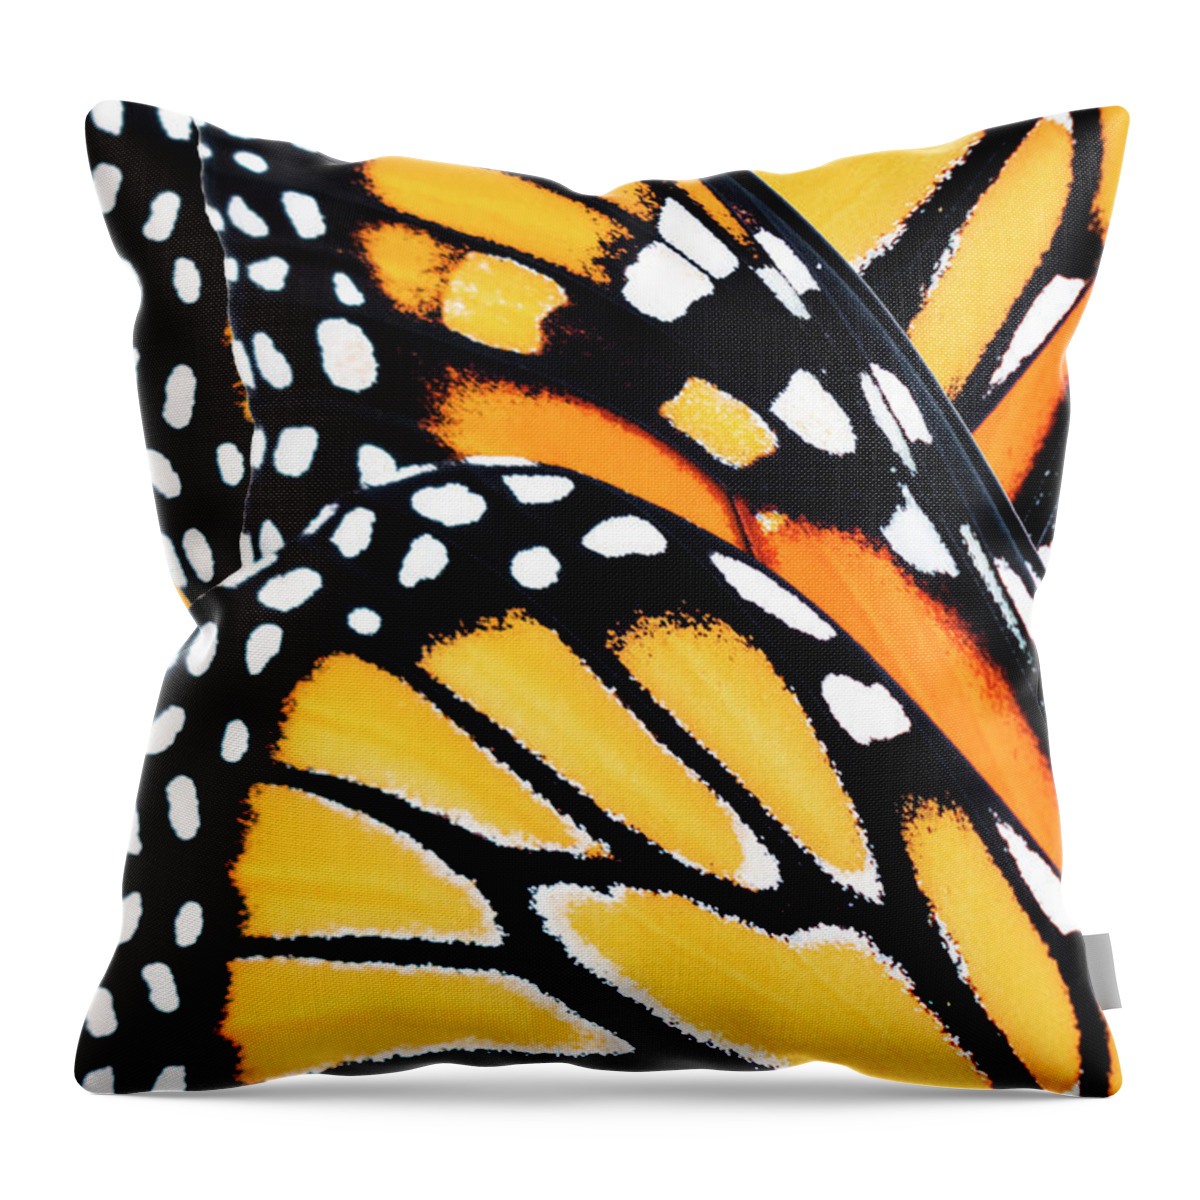 Monarch Butterfly Throw Pillow featuring the mixed media Monarch Butterfly Abstract Pattern by Christina Rollo